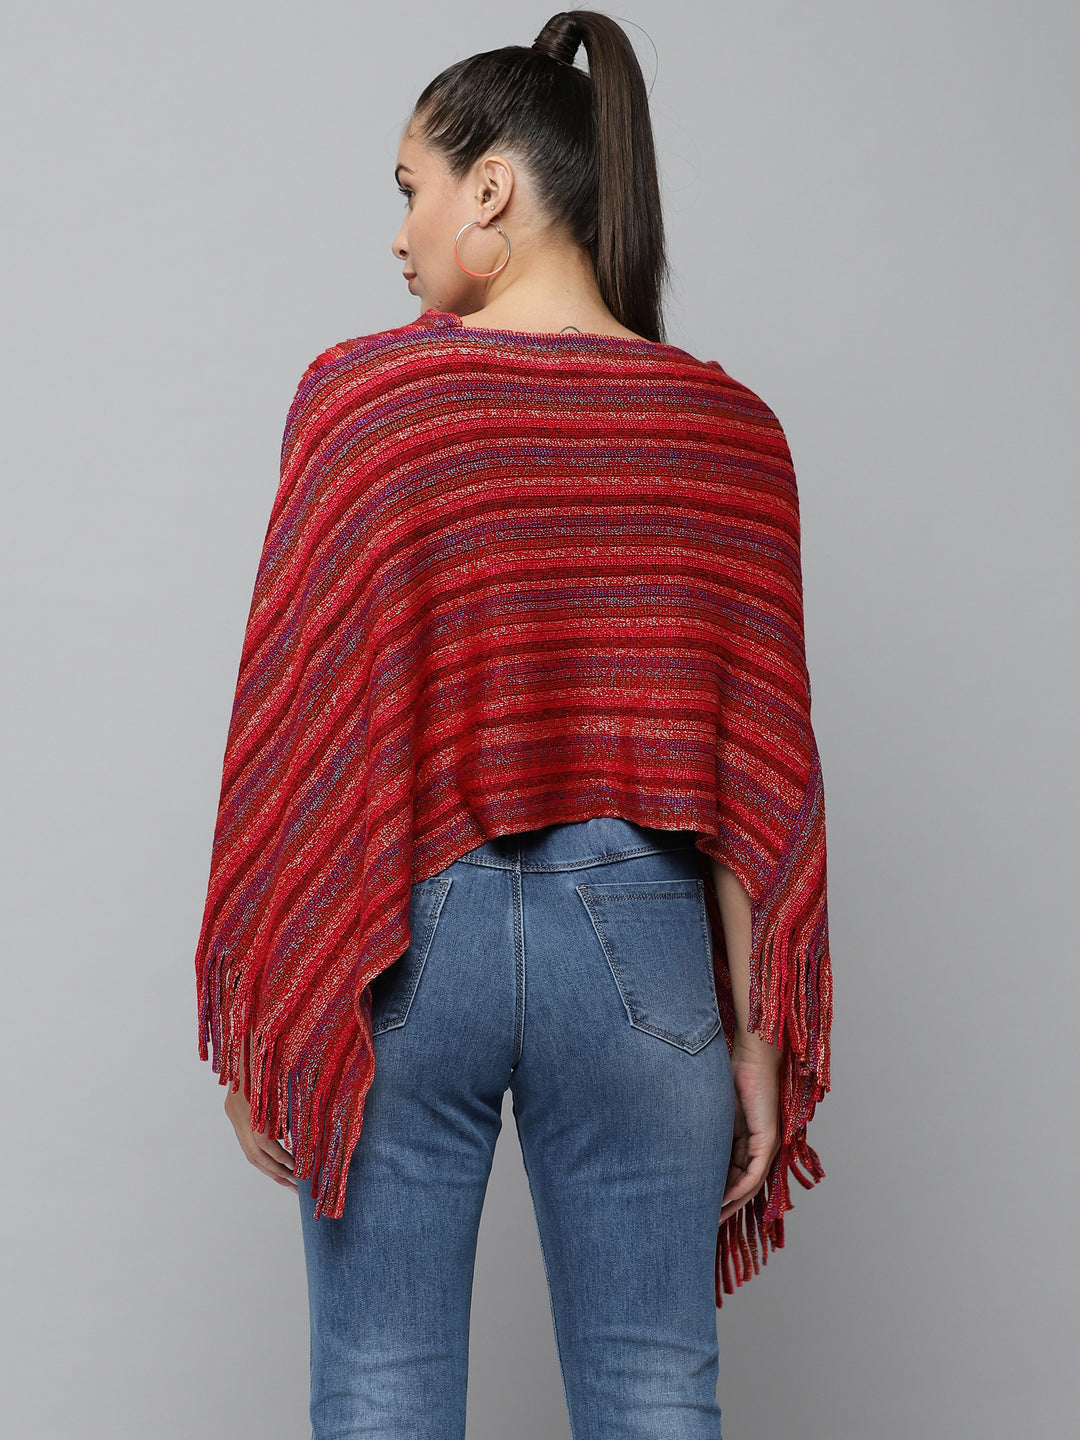 Women's Red Striped Poncho Sweater